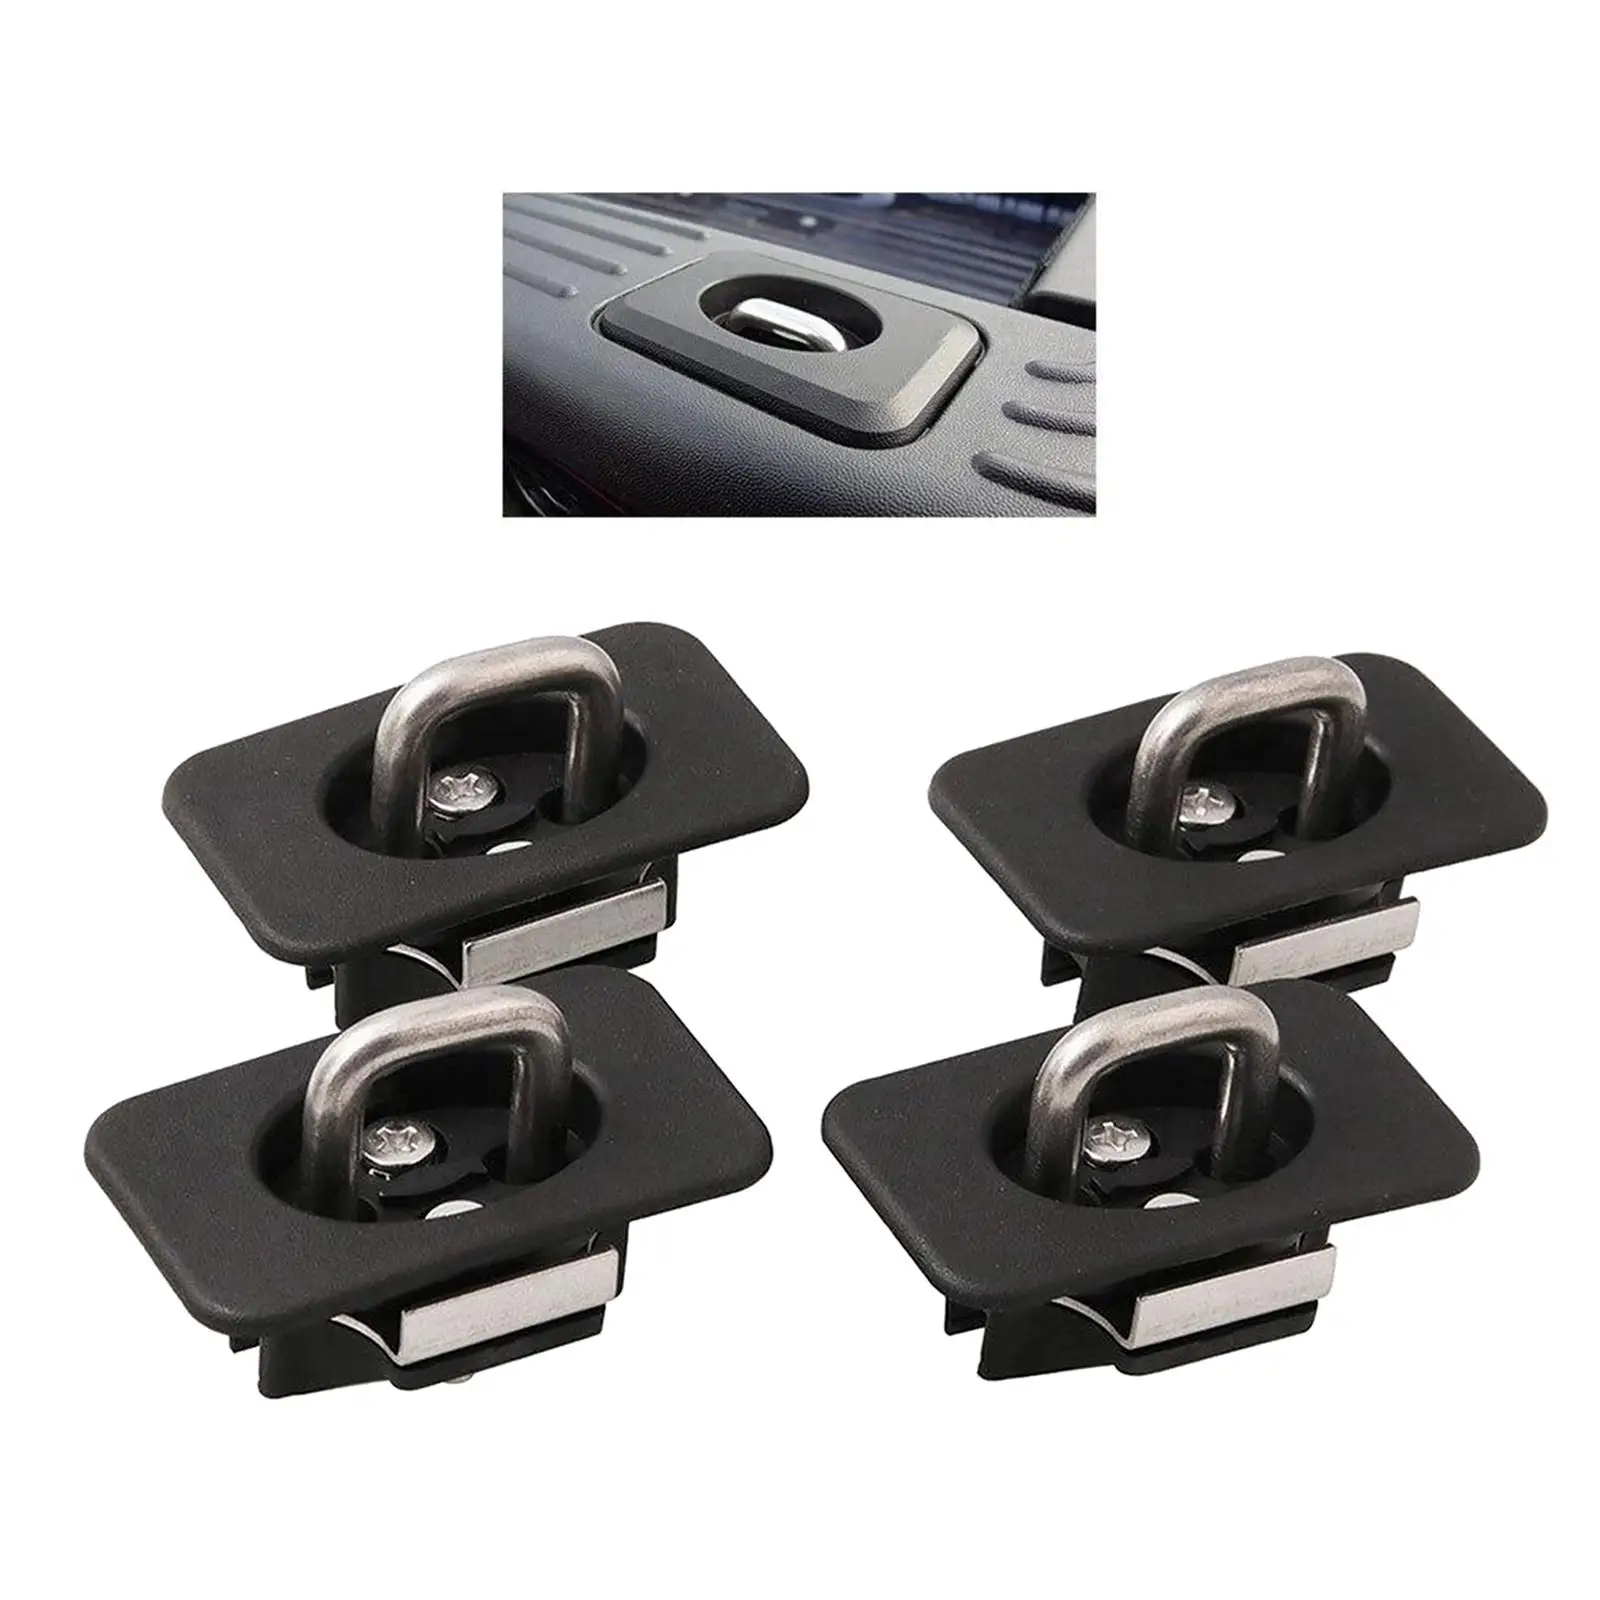 4x Pickup Truck Tie Down Anchors Fit for F 150 1998-2014 Super-Duty Car Accessories